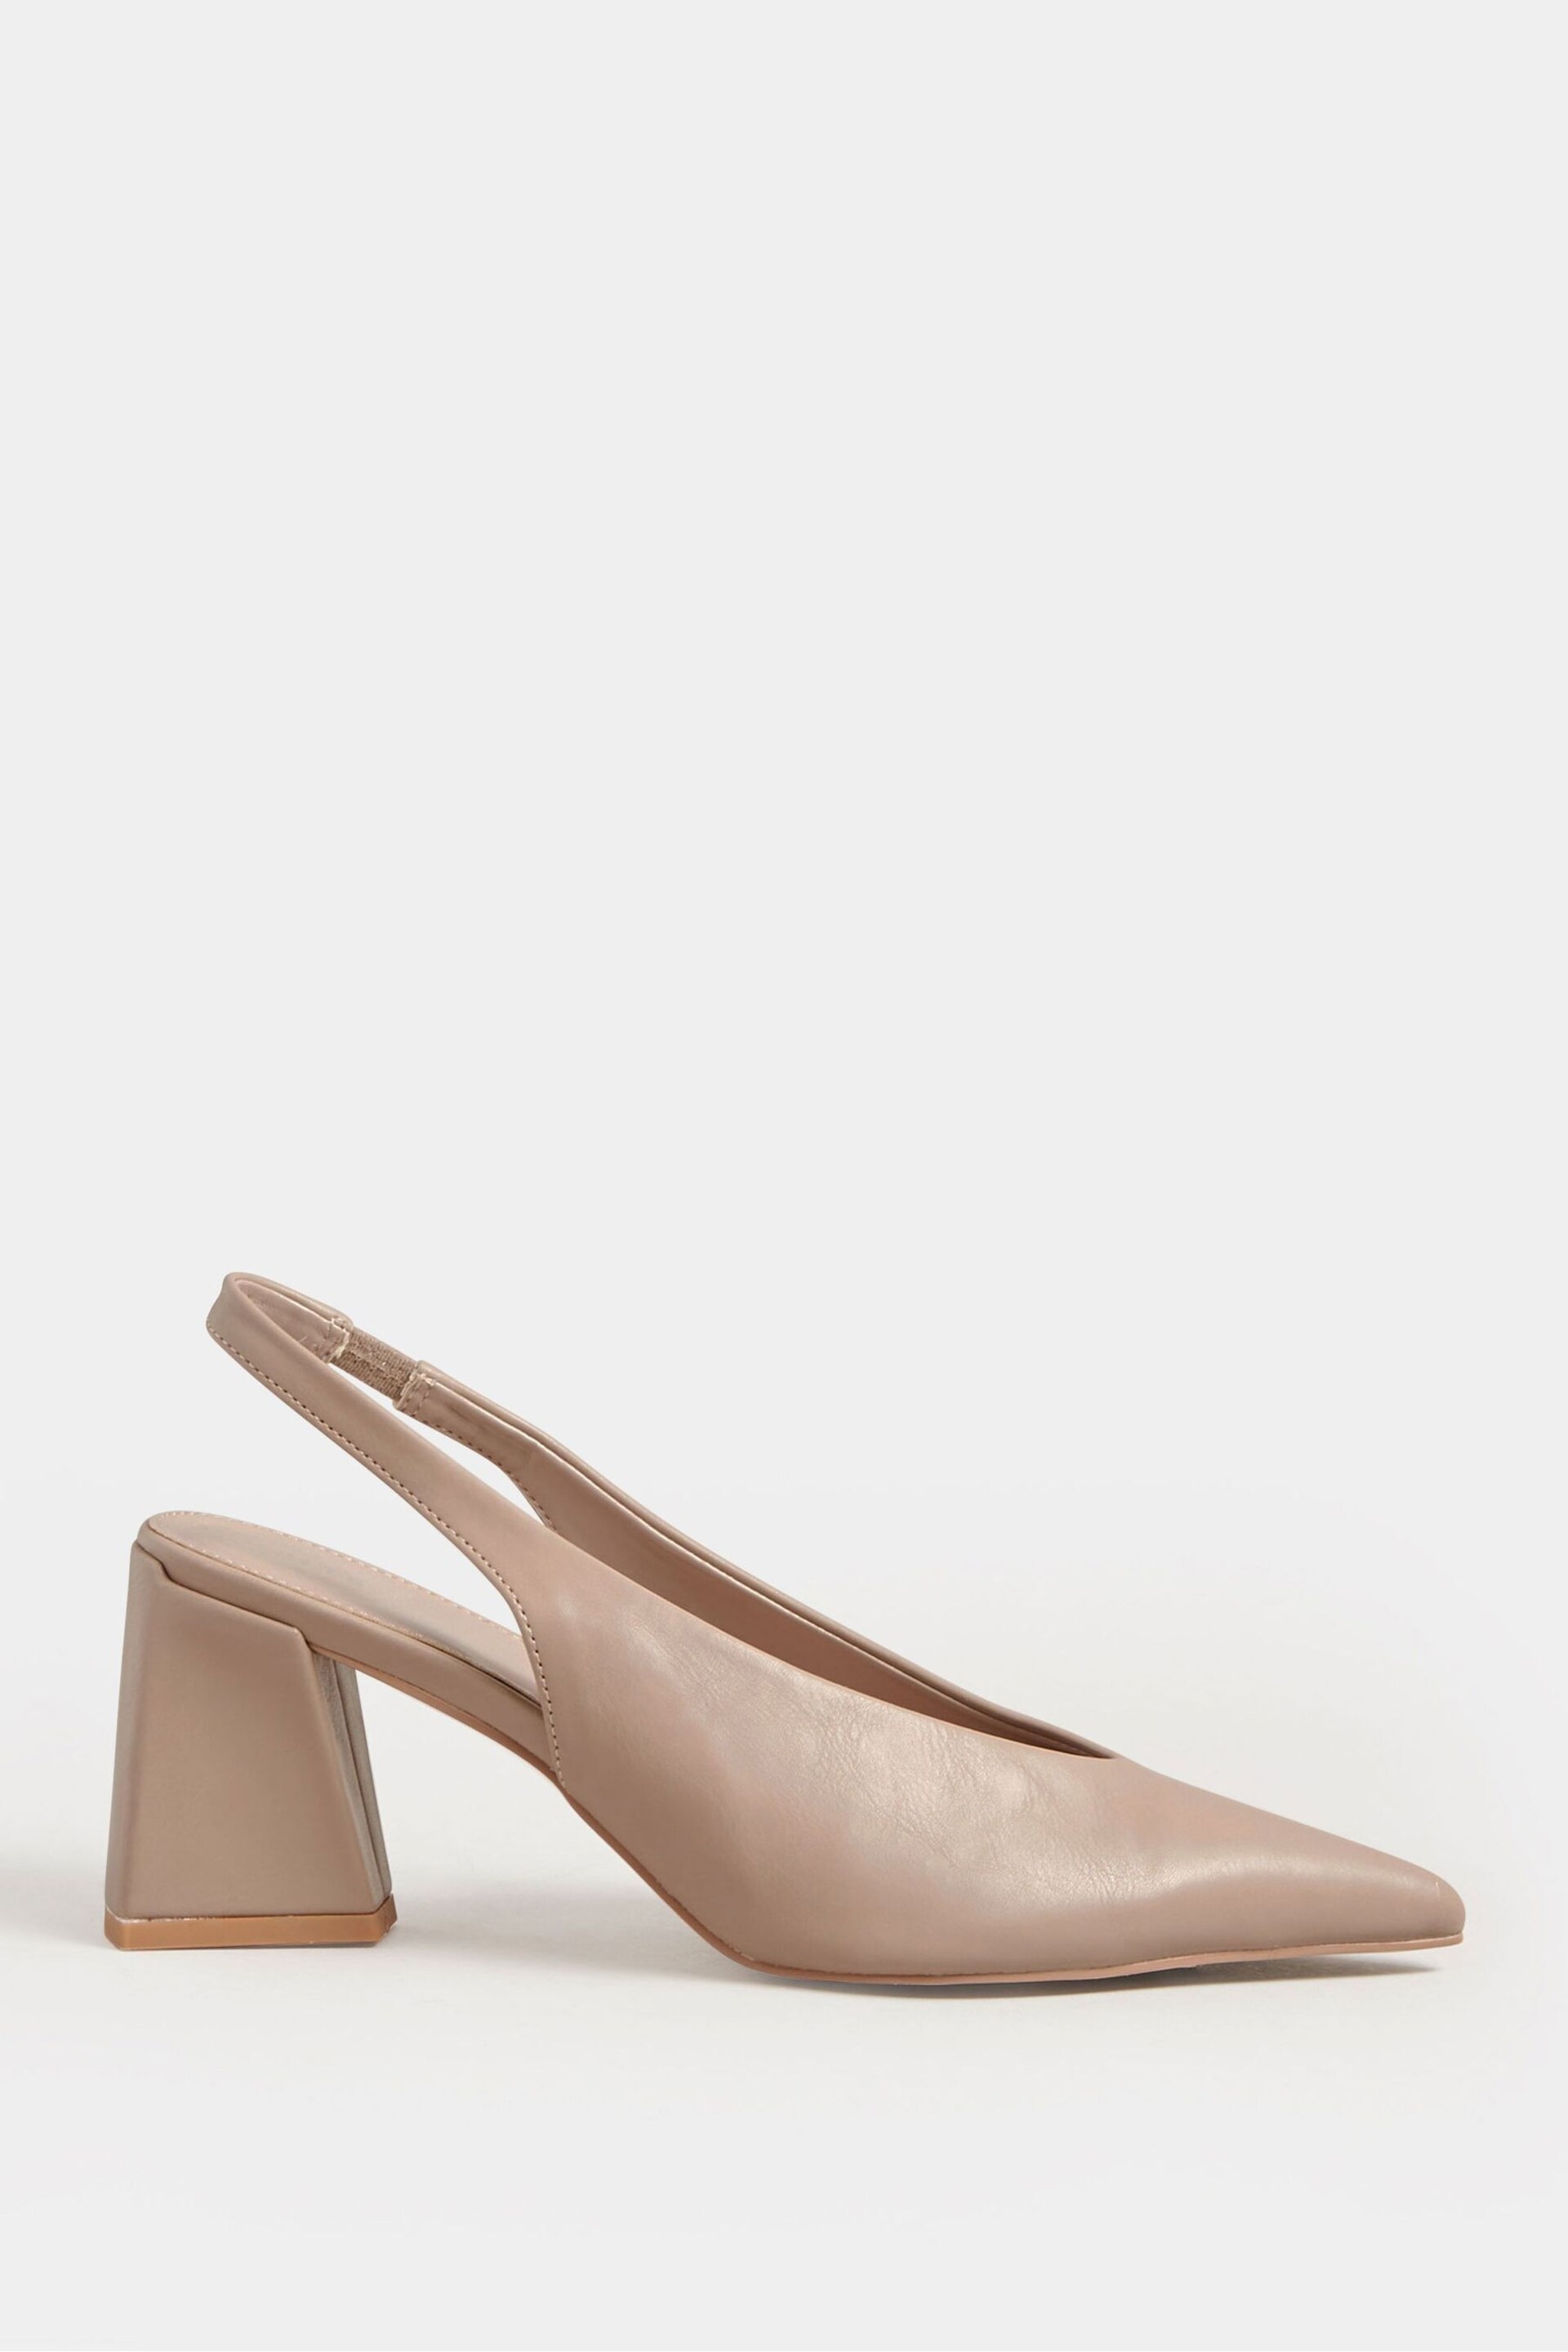 Long Tall Sally Nude Slingback Courts - Image 2 of 4